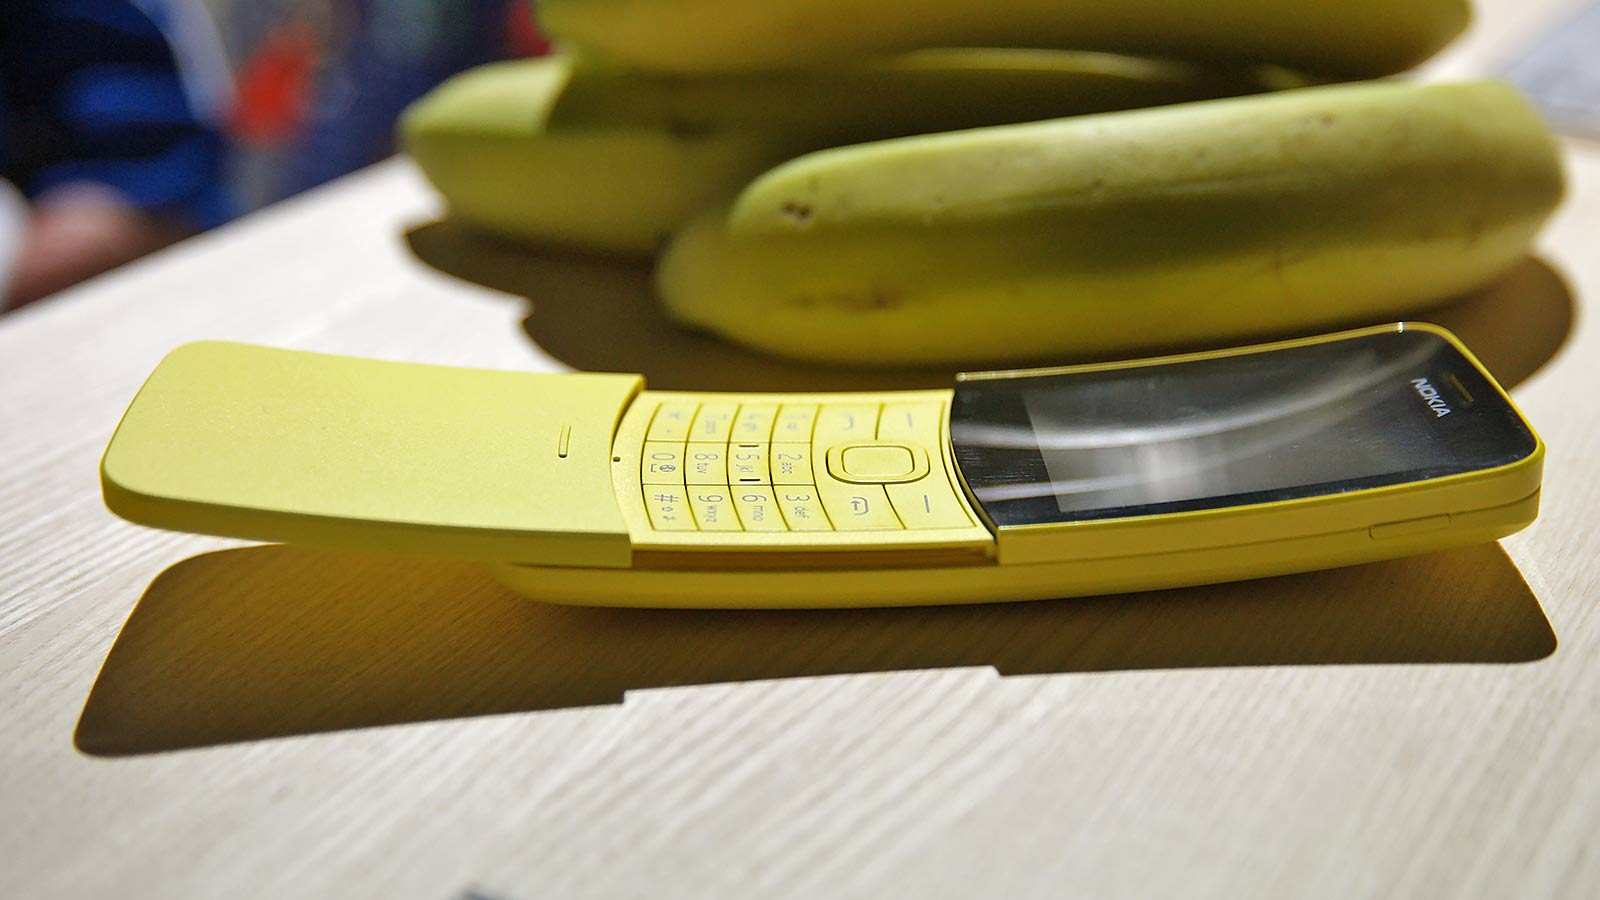 Nokia’s Latest Retro Revival Is Making Me Crave Bananas